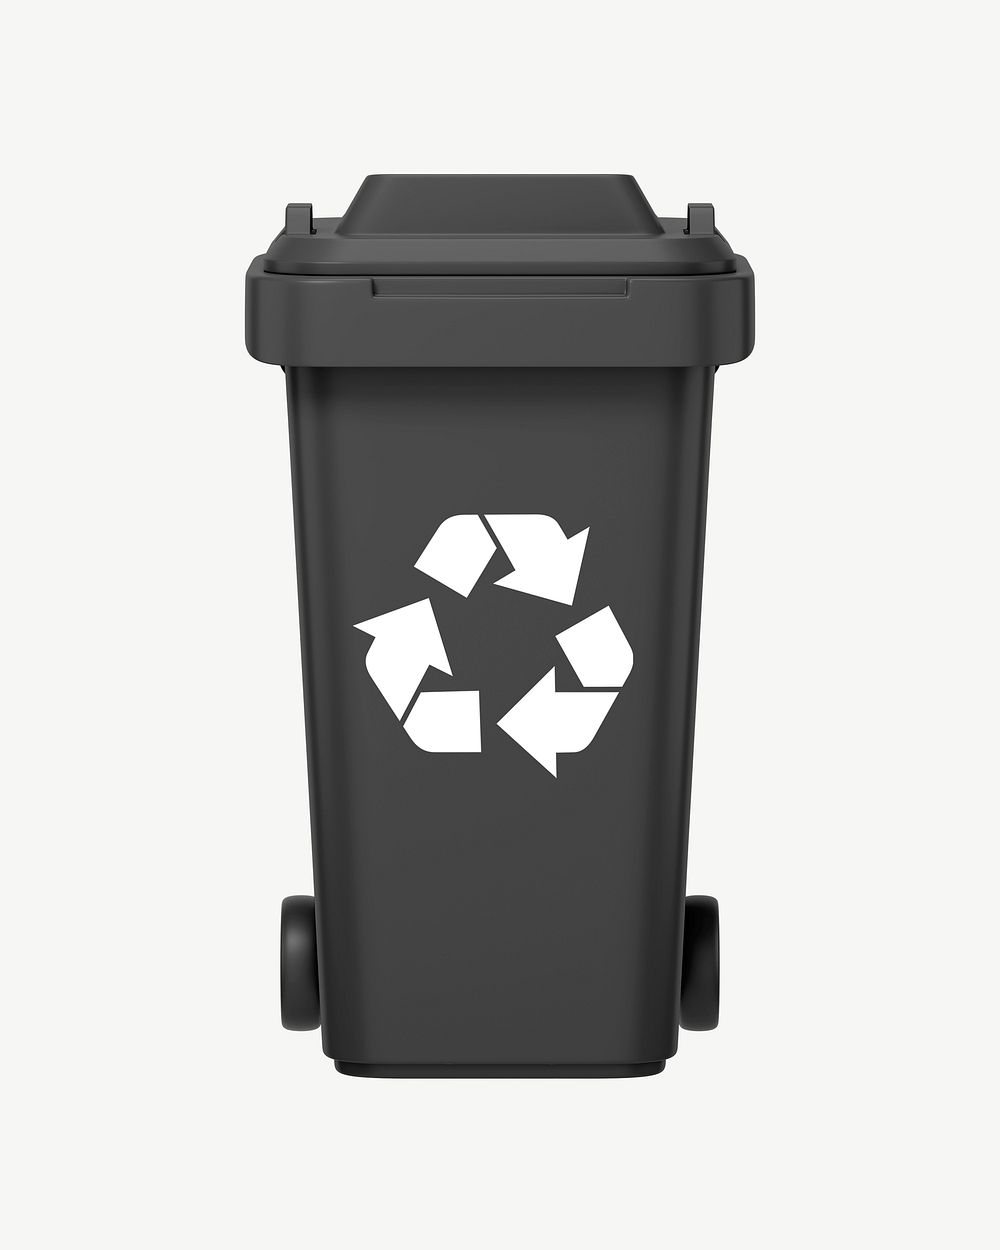 3D recycling bin, collage element psd